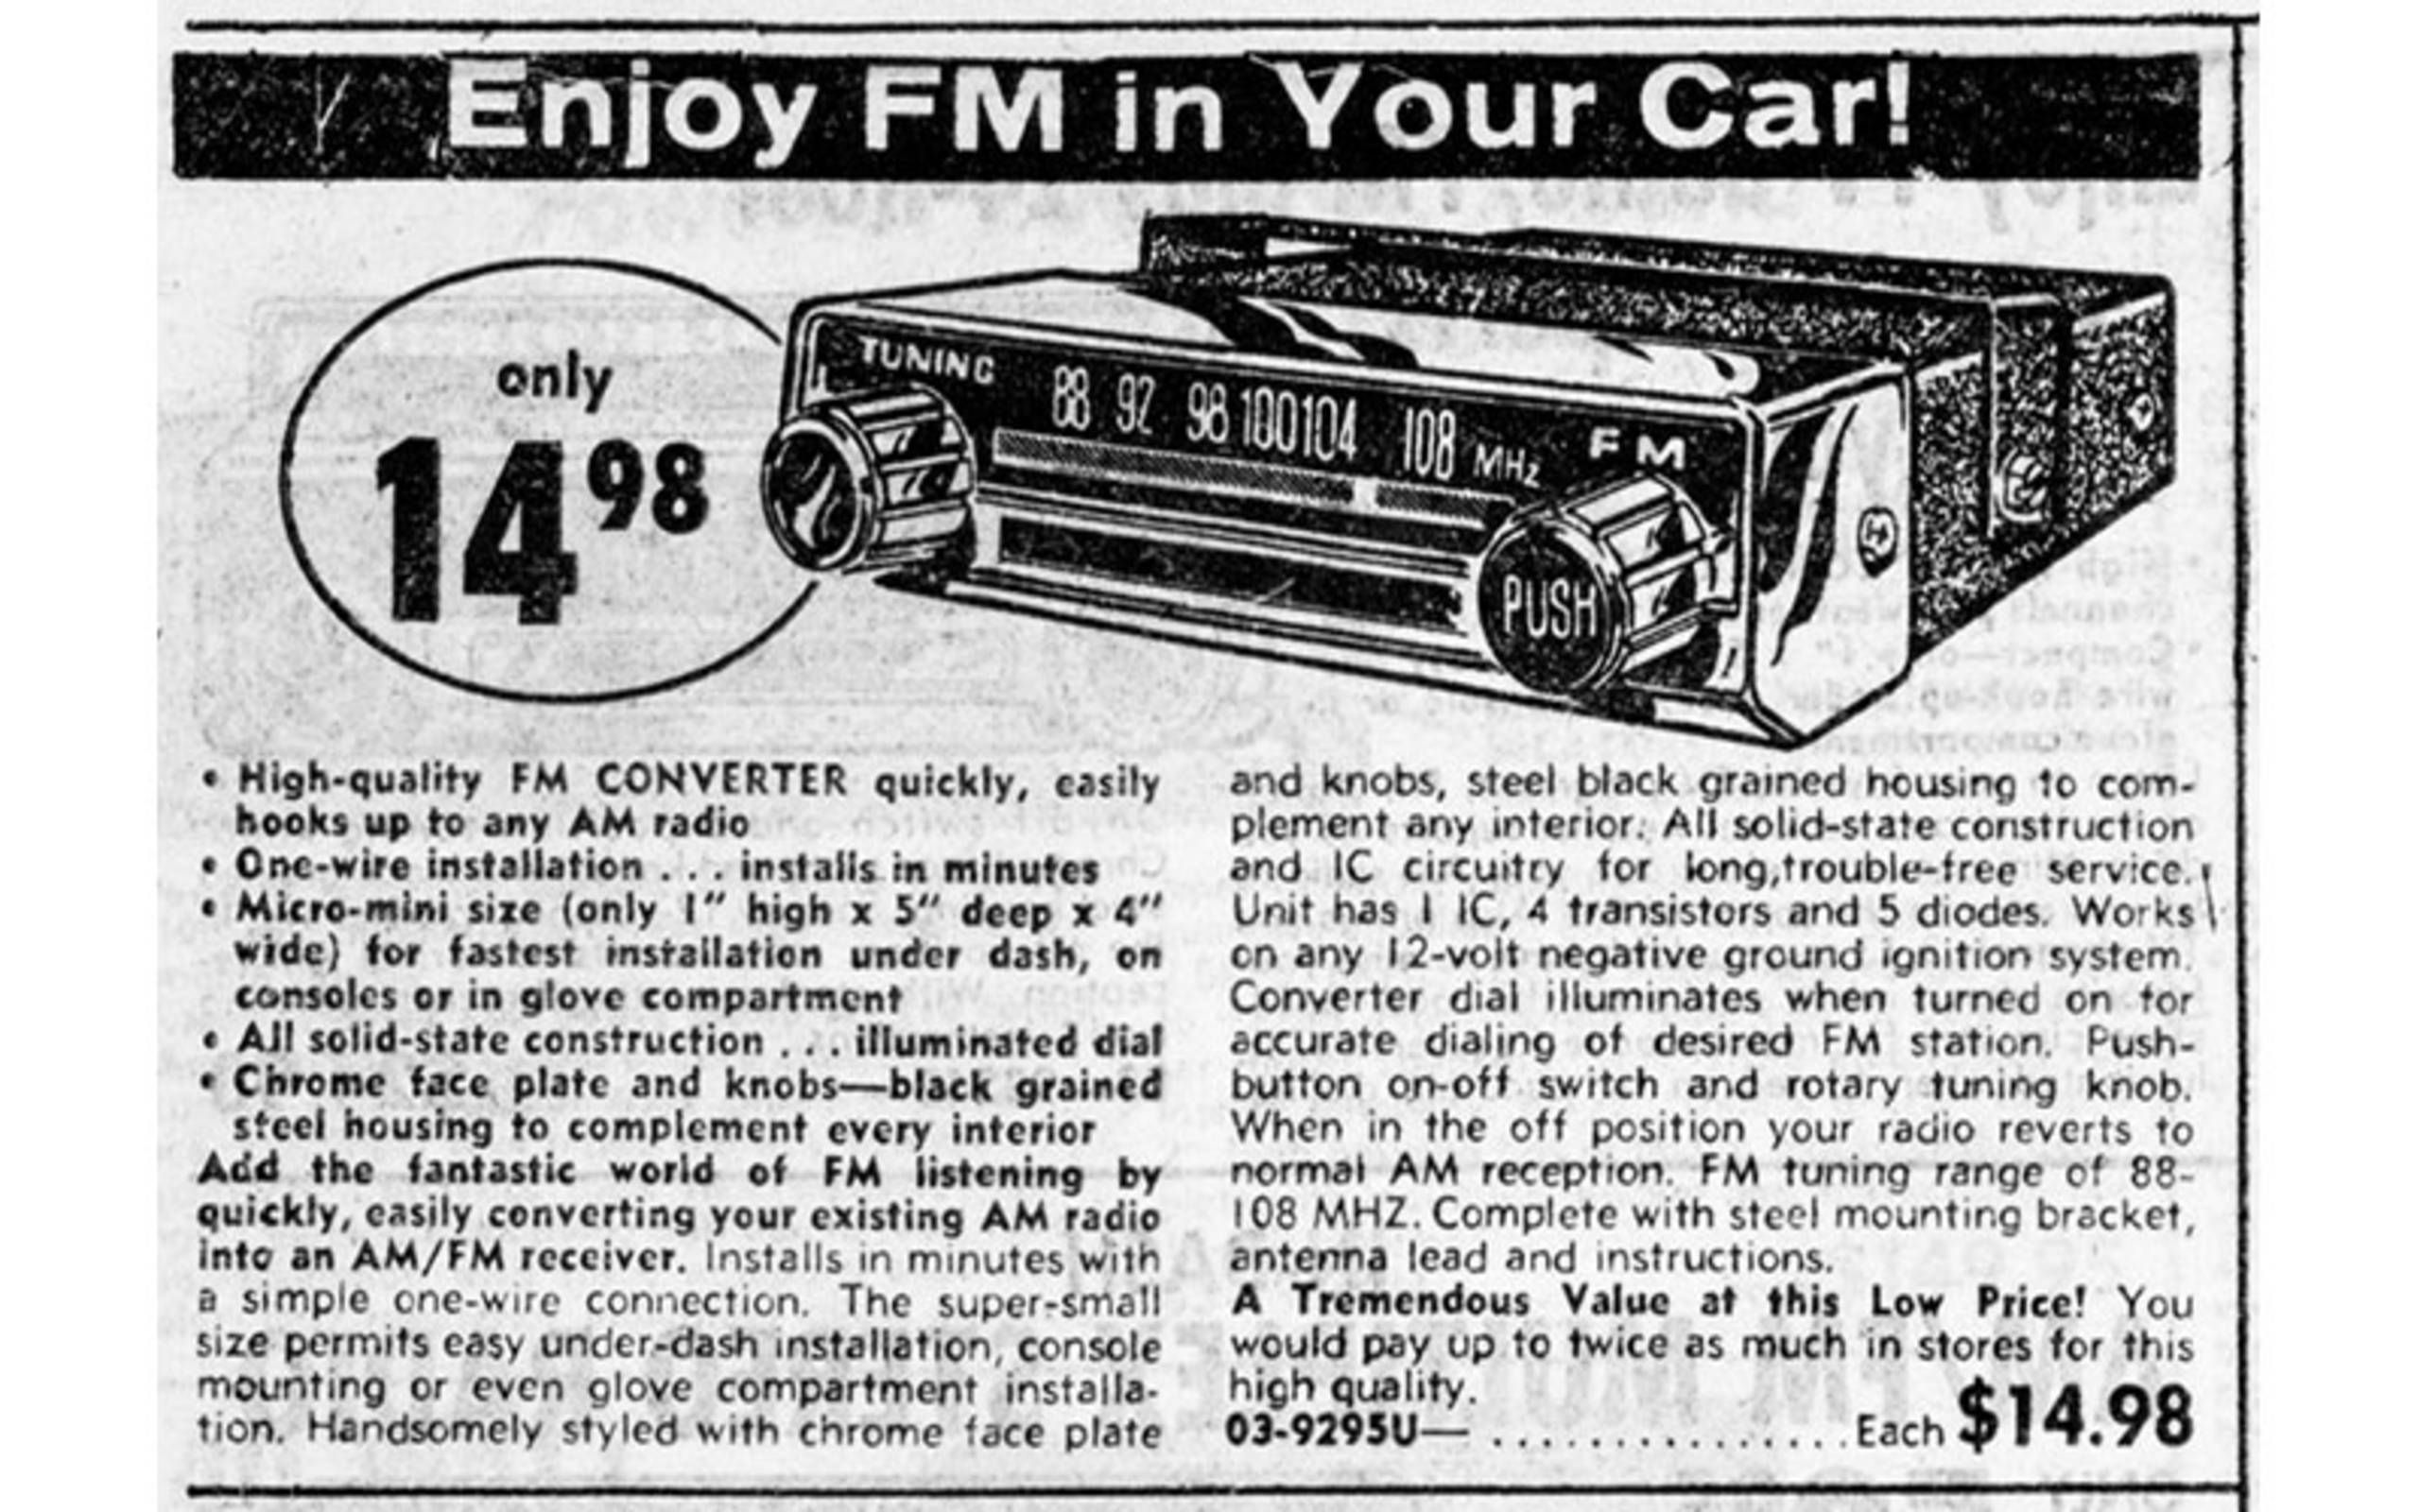 1983: Make your cassette deck look like a cheap factory radio, foil thieves